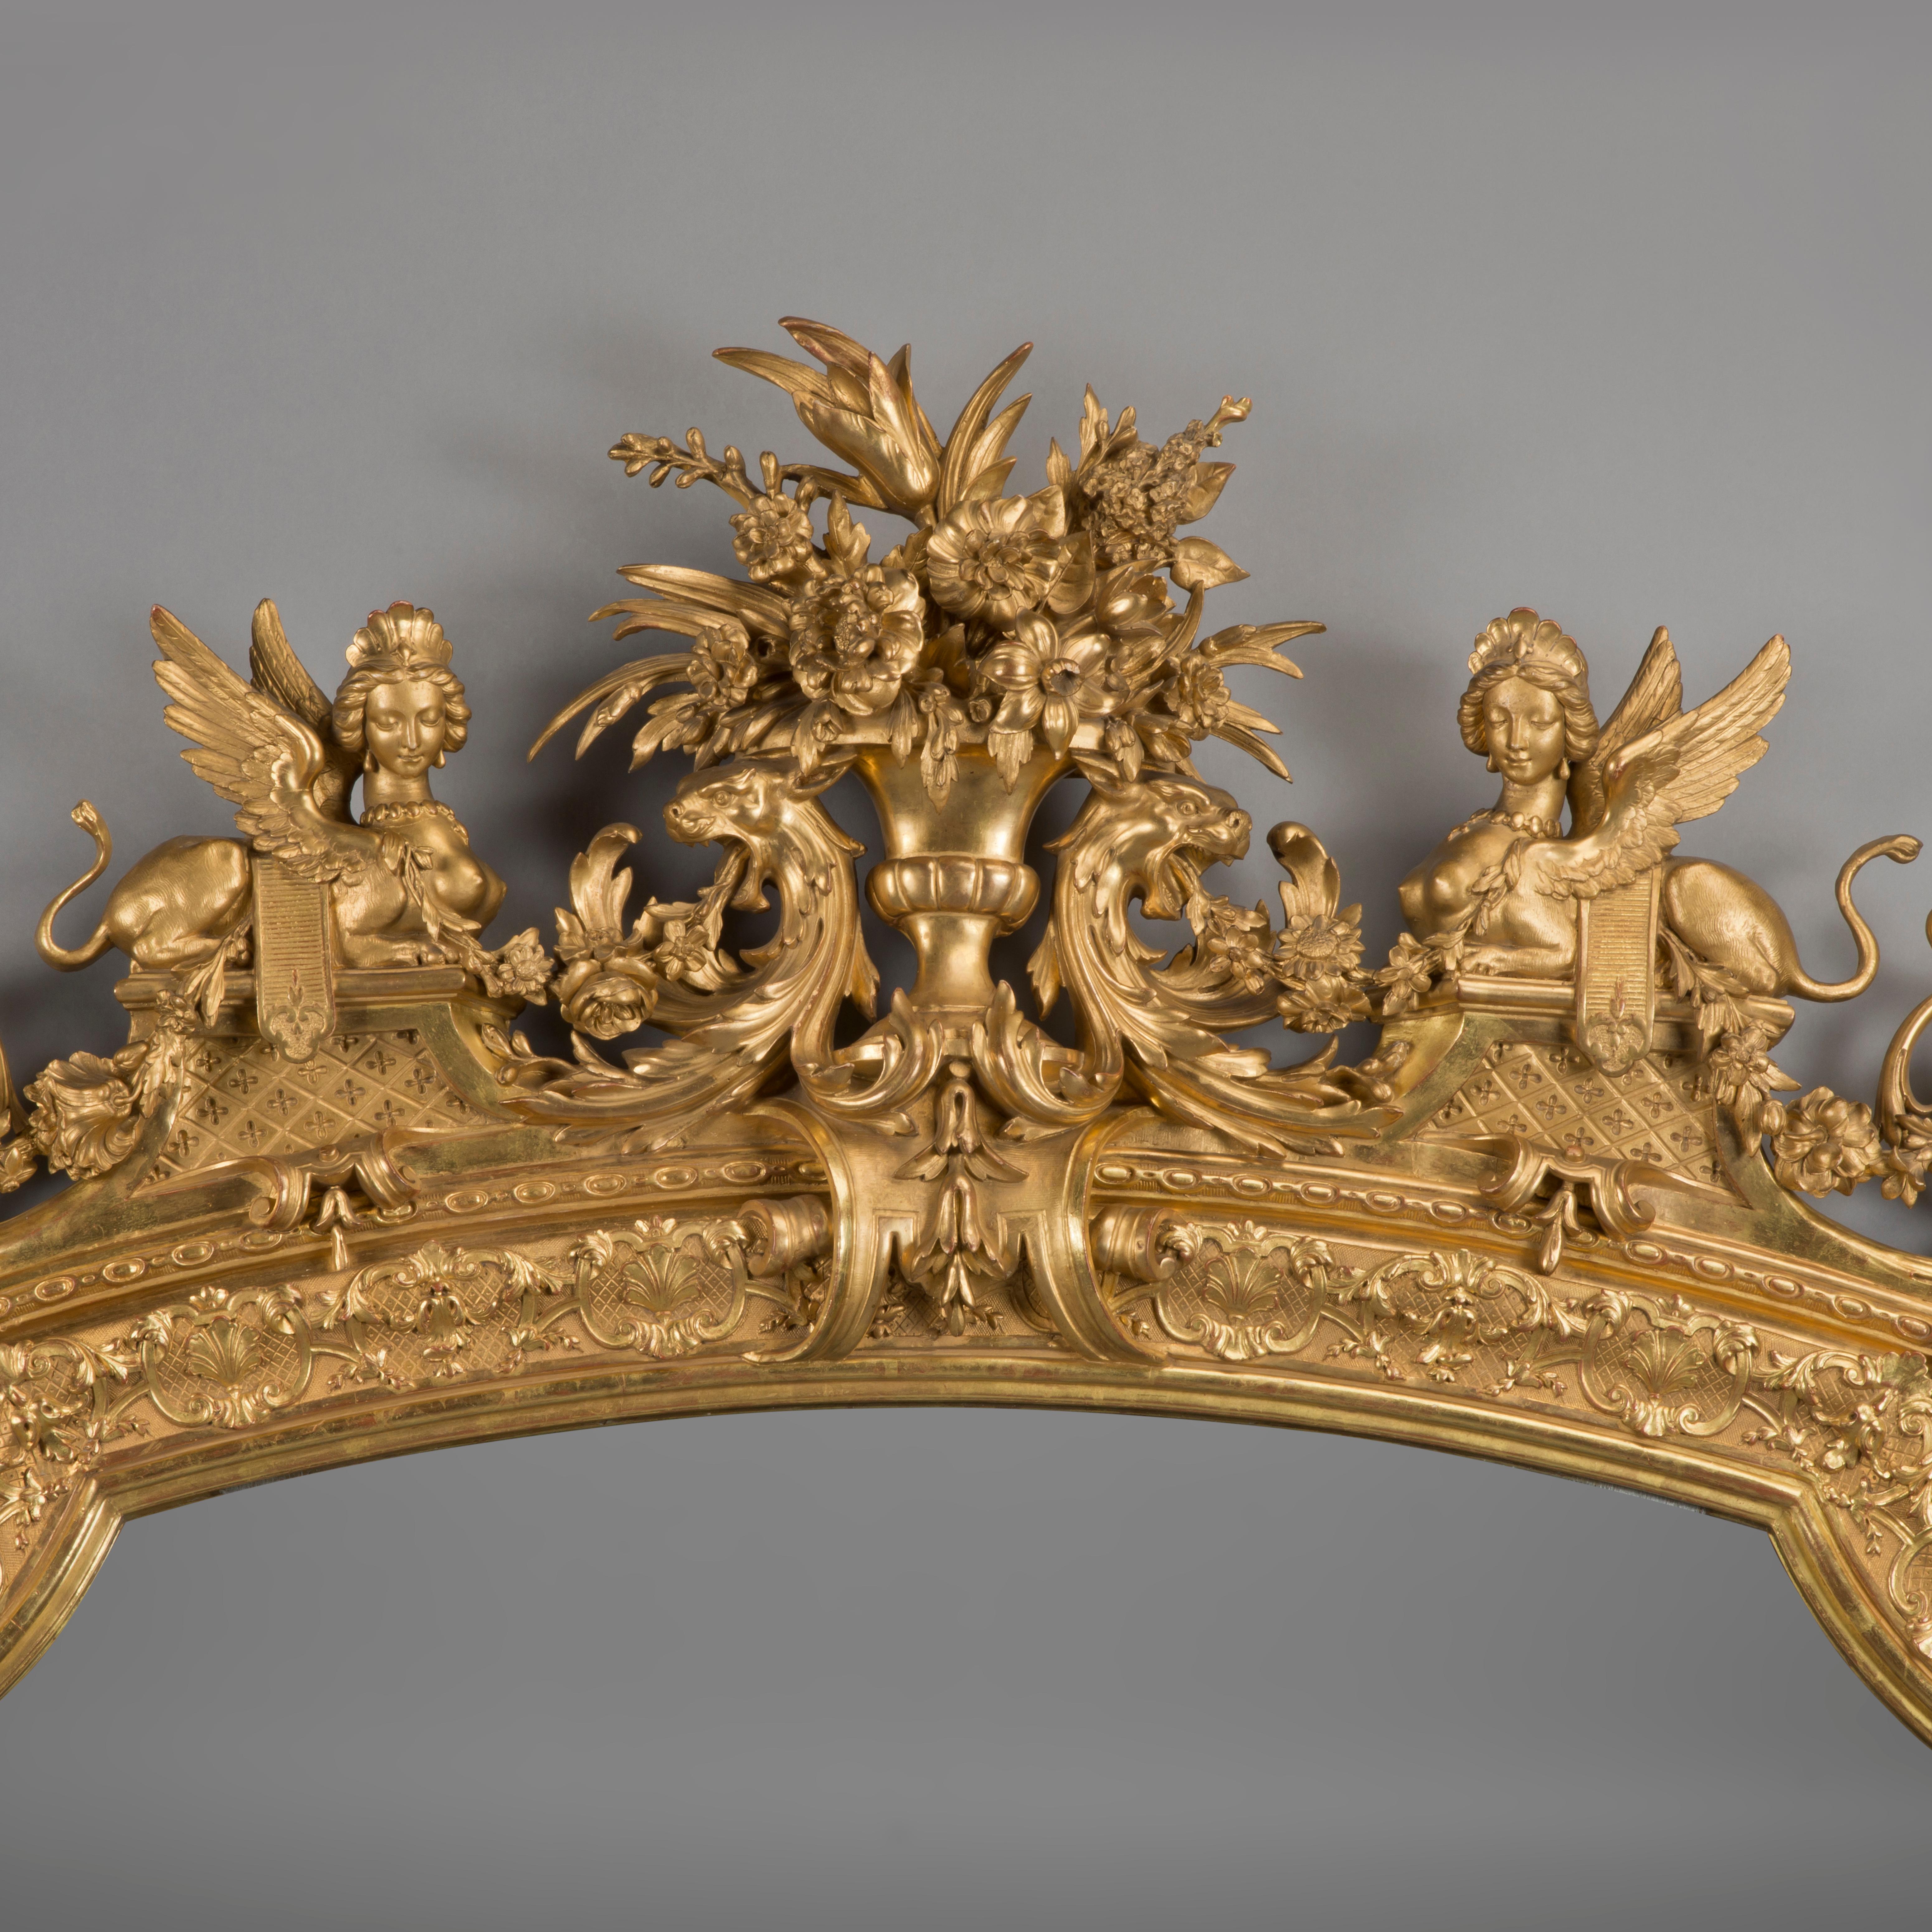 A large and impressive Louis XVI style carved giltwood and gesso mirror.

At over 100 inches tall (260 cm) this impressive mirror is of large size and finely carved with a figural cresting rail centred by a vase issuing flowers flanked by